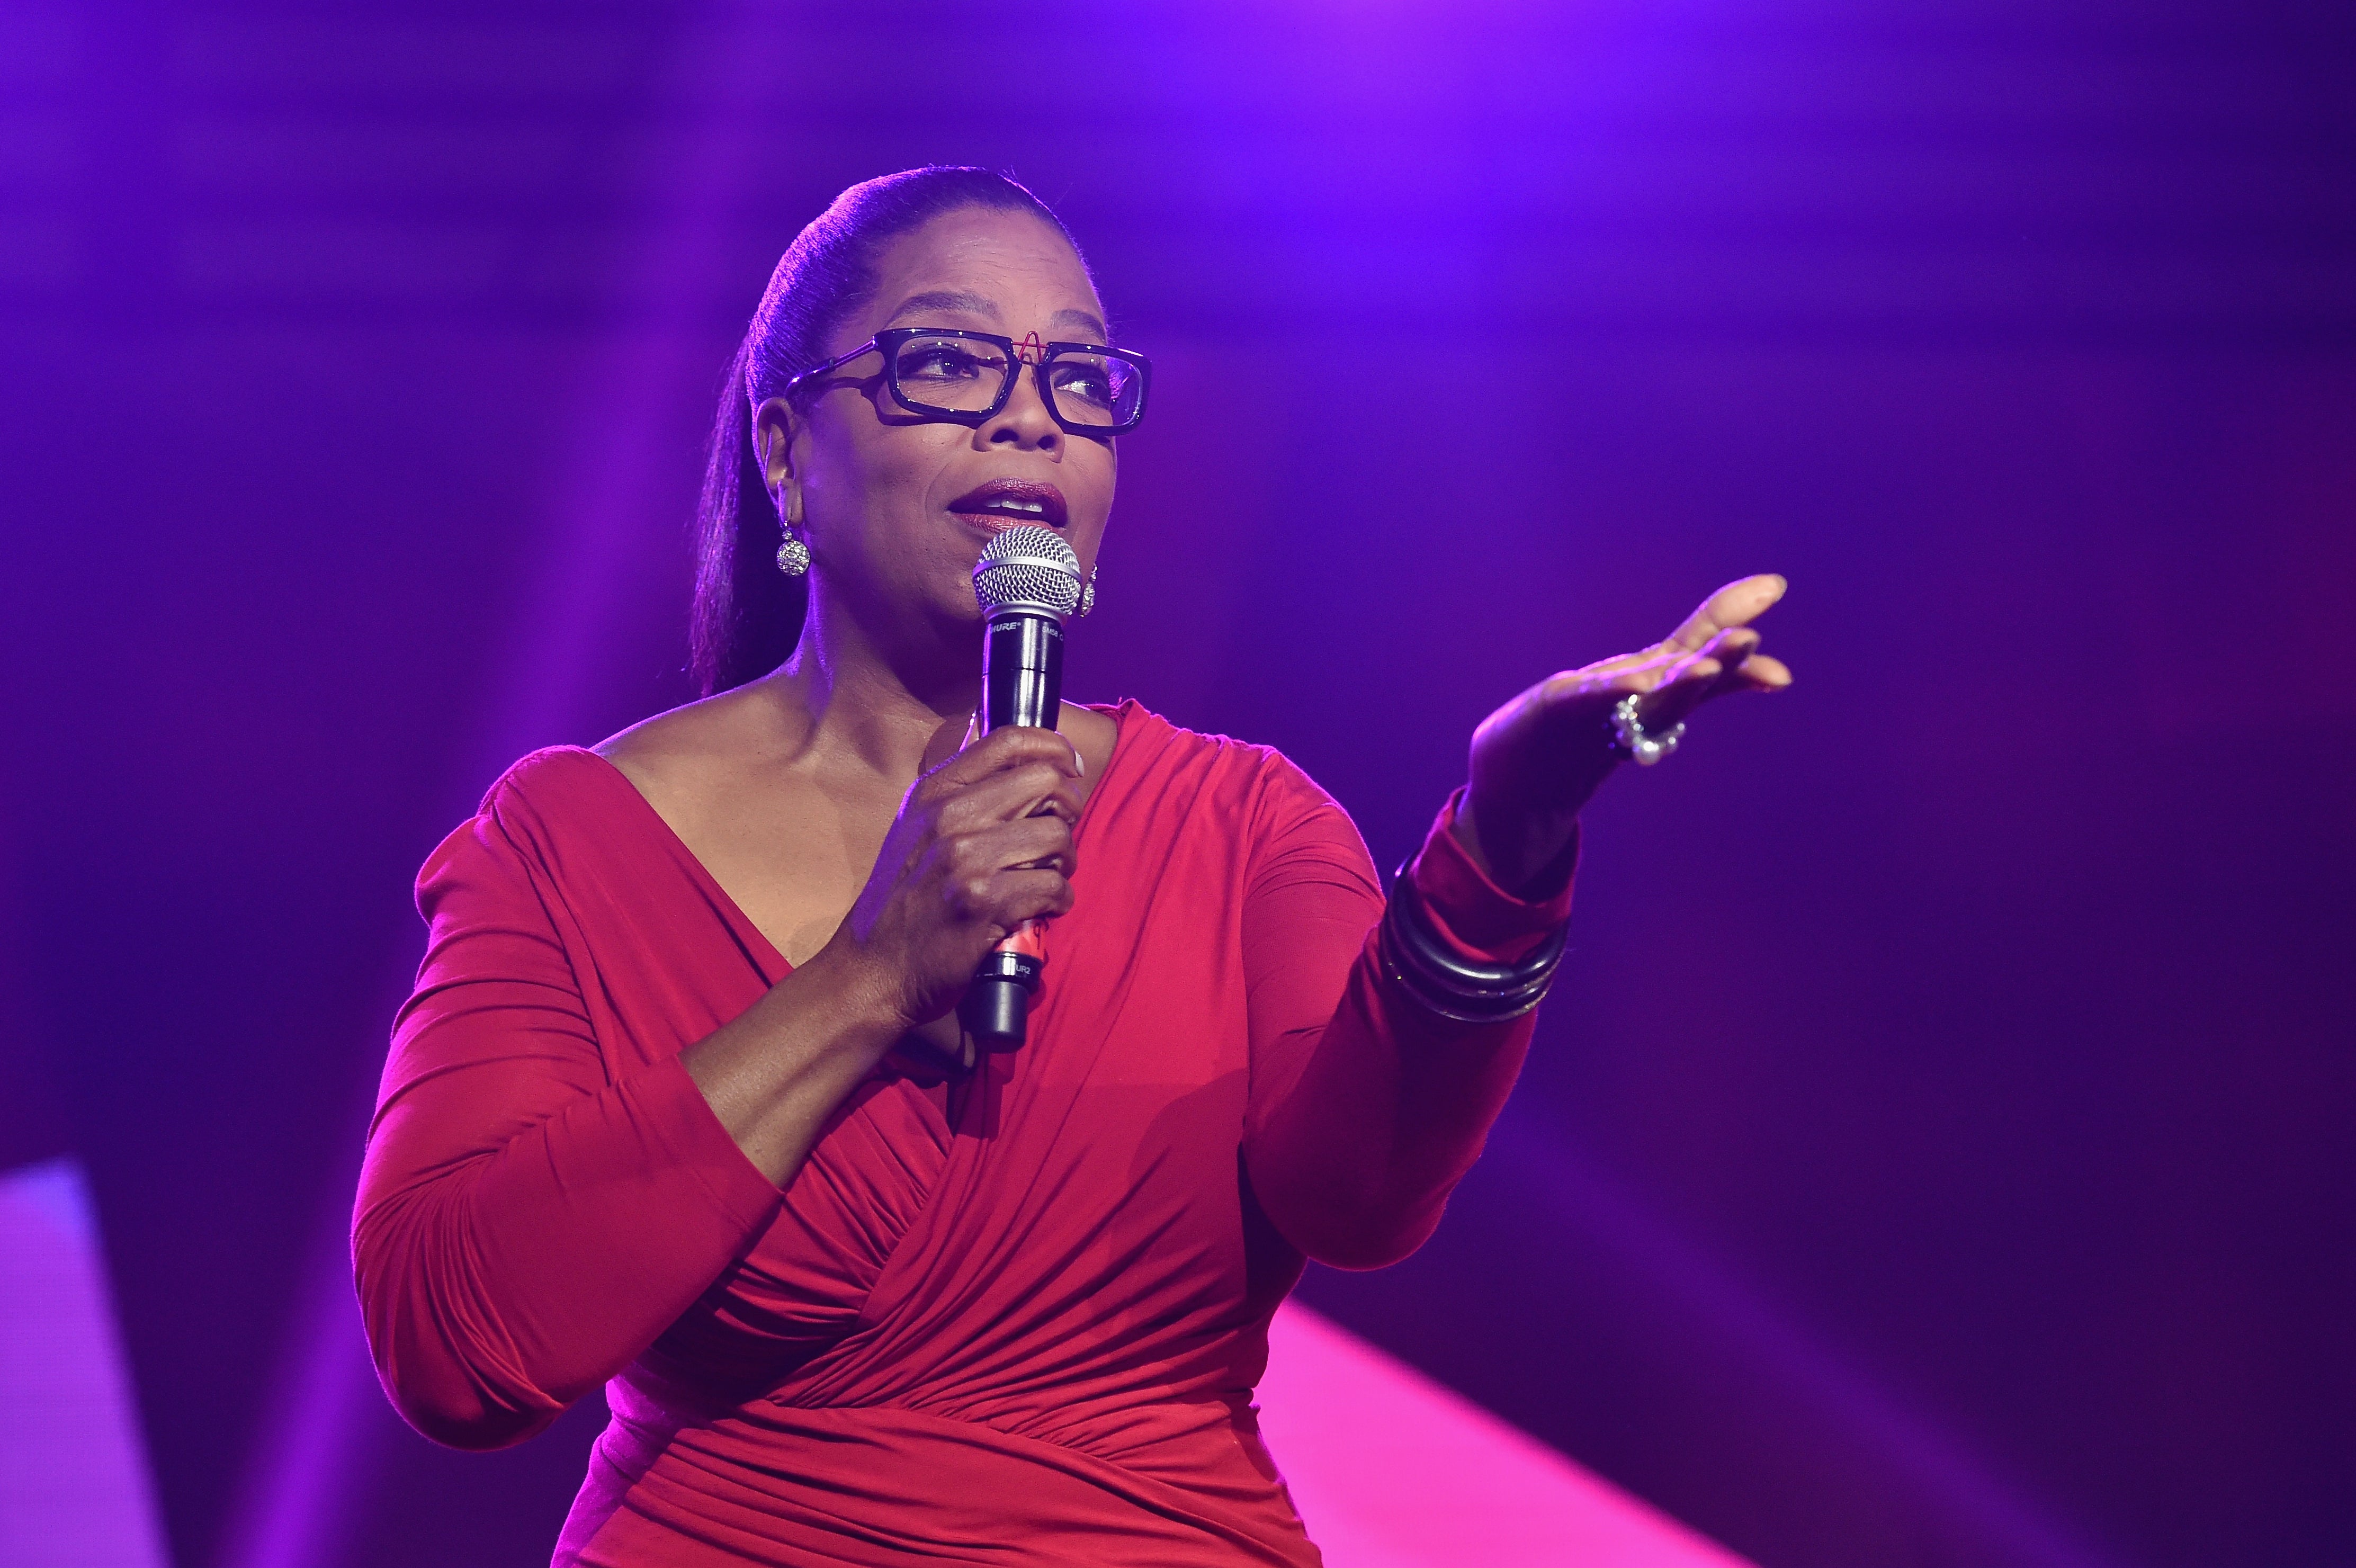 We All Know Oprah Is Everything, But She Laid Us Out At Essence Festival
